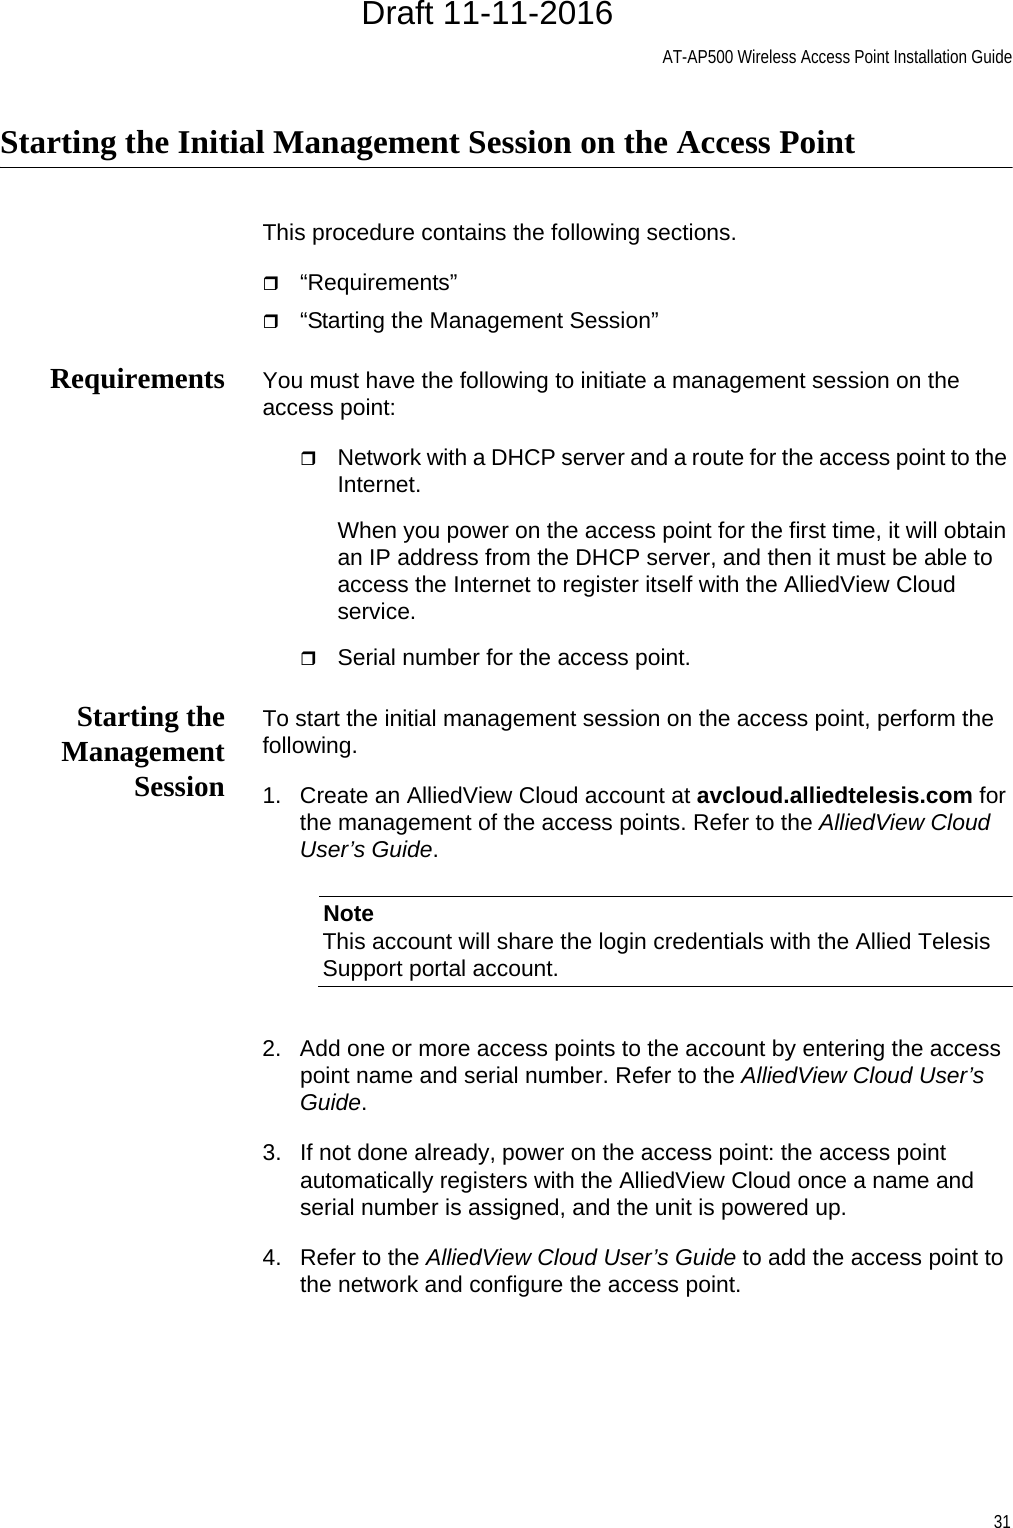 AT-AP500 Wireless Access Point Installation Guide31Starting the Initial Management Session on the Access PointThis procedure contains the following sections.“Requirements”“Starting the Management Session”Requirements You must have the following to initiate a management session on the access point:Network with a DHCP server and a route for the access point to the Internet.When you power on the access point for the first time, it will obtain an IP address from the DHCP server, and then it must be able to access the Internet to register itself with the AlliedView Cloud service.Serial number for the access point.Starting theManagementSessionTo start the initial management session on the access point, perform the following.1. Create an AlliedView Cloud account at avcloud.alliedtelesis.com for the management of the access points. Refer to the AlliedView Cloud User’s Guide.NoteThis account will share the login credentials with the Allied Telesis Support portal account.2. Add one or more access points to the account by entering the access point name and serial number. Refer to the AlliedView Cloud User’s Guide.3. If not done already, power on the access point: the access point automatically registers with the AlliedView Cloud once a name and serial number is assigned, and the unit is powered up.4. Refer to the AlliedView Cloud User’s Guide to add the access point to the network and configure the access point.Draft 11-11-2016